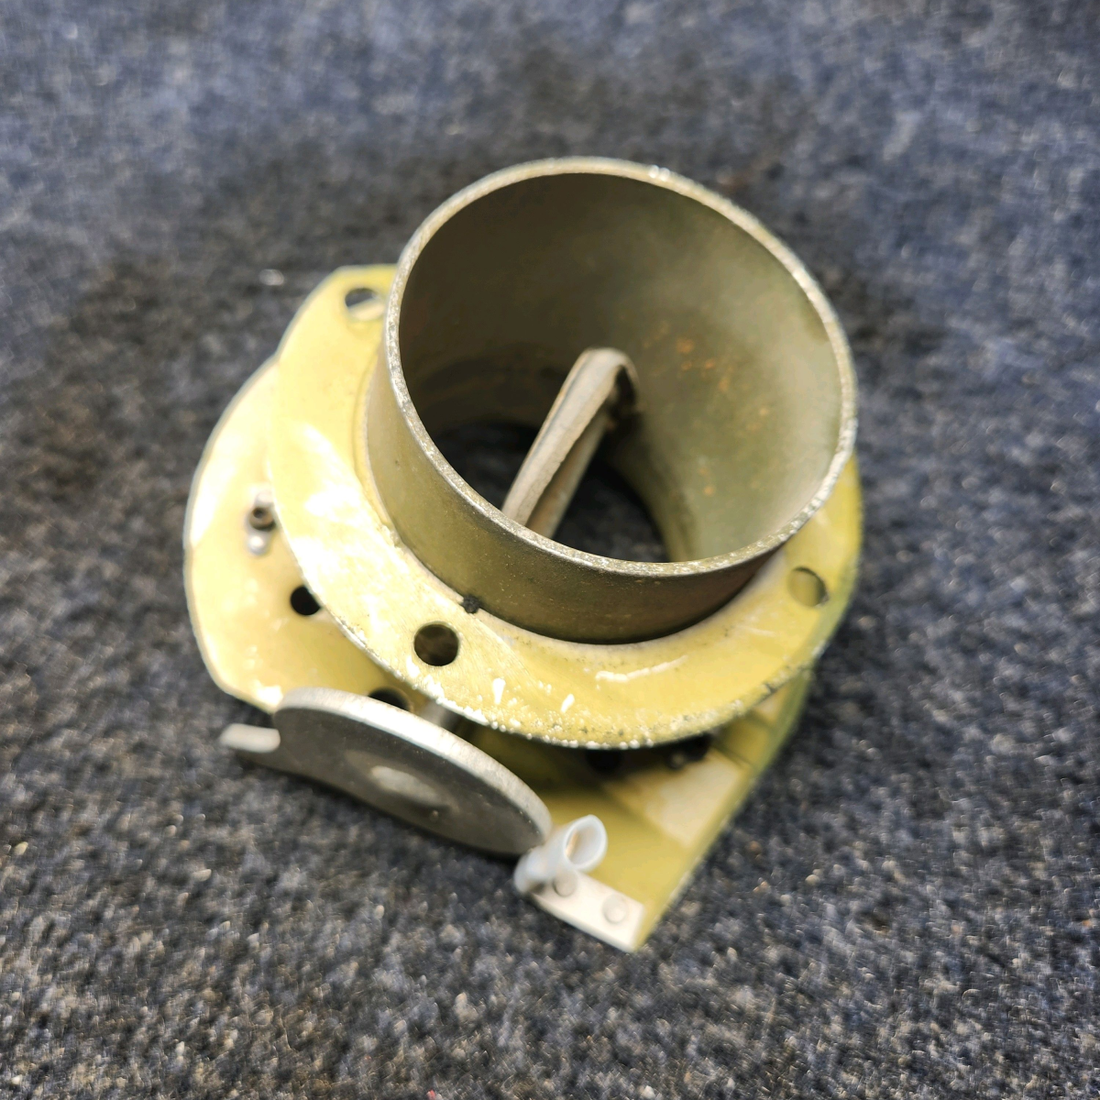 Used aircraft parts for sale, 68556-000 Piper PA32RT-300 AIR VENT ASSEMBLY REAR LH